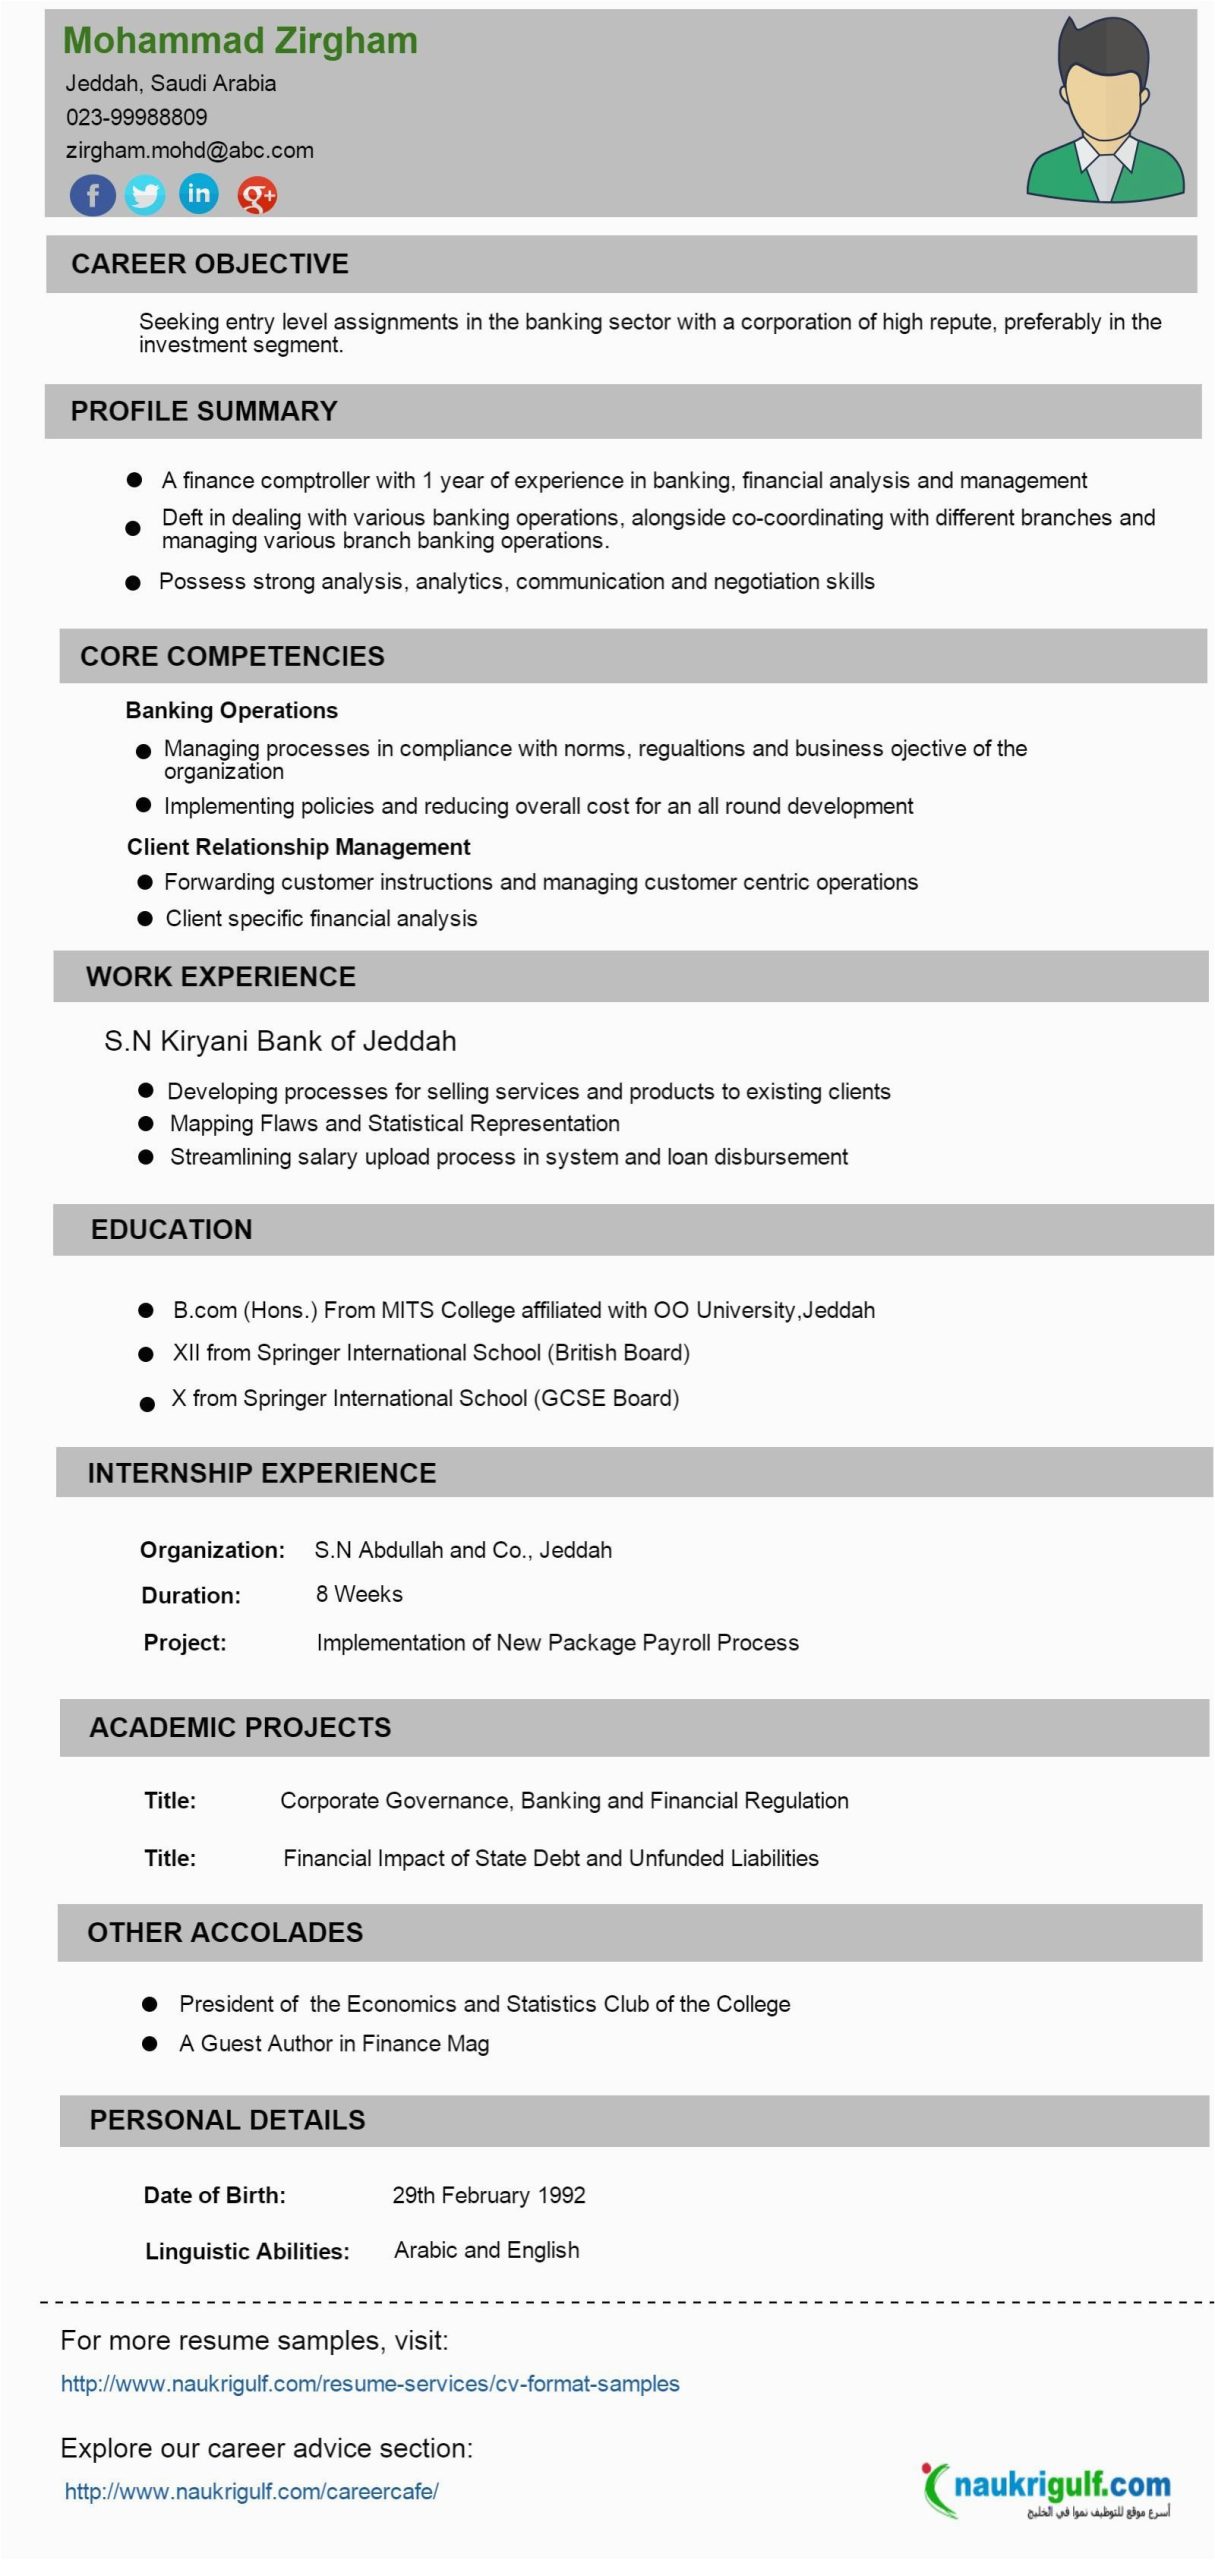 Sample Resume for Bank Back Office Executive Resume format for Freshers for Bank Job Free Investment Banking